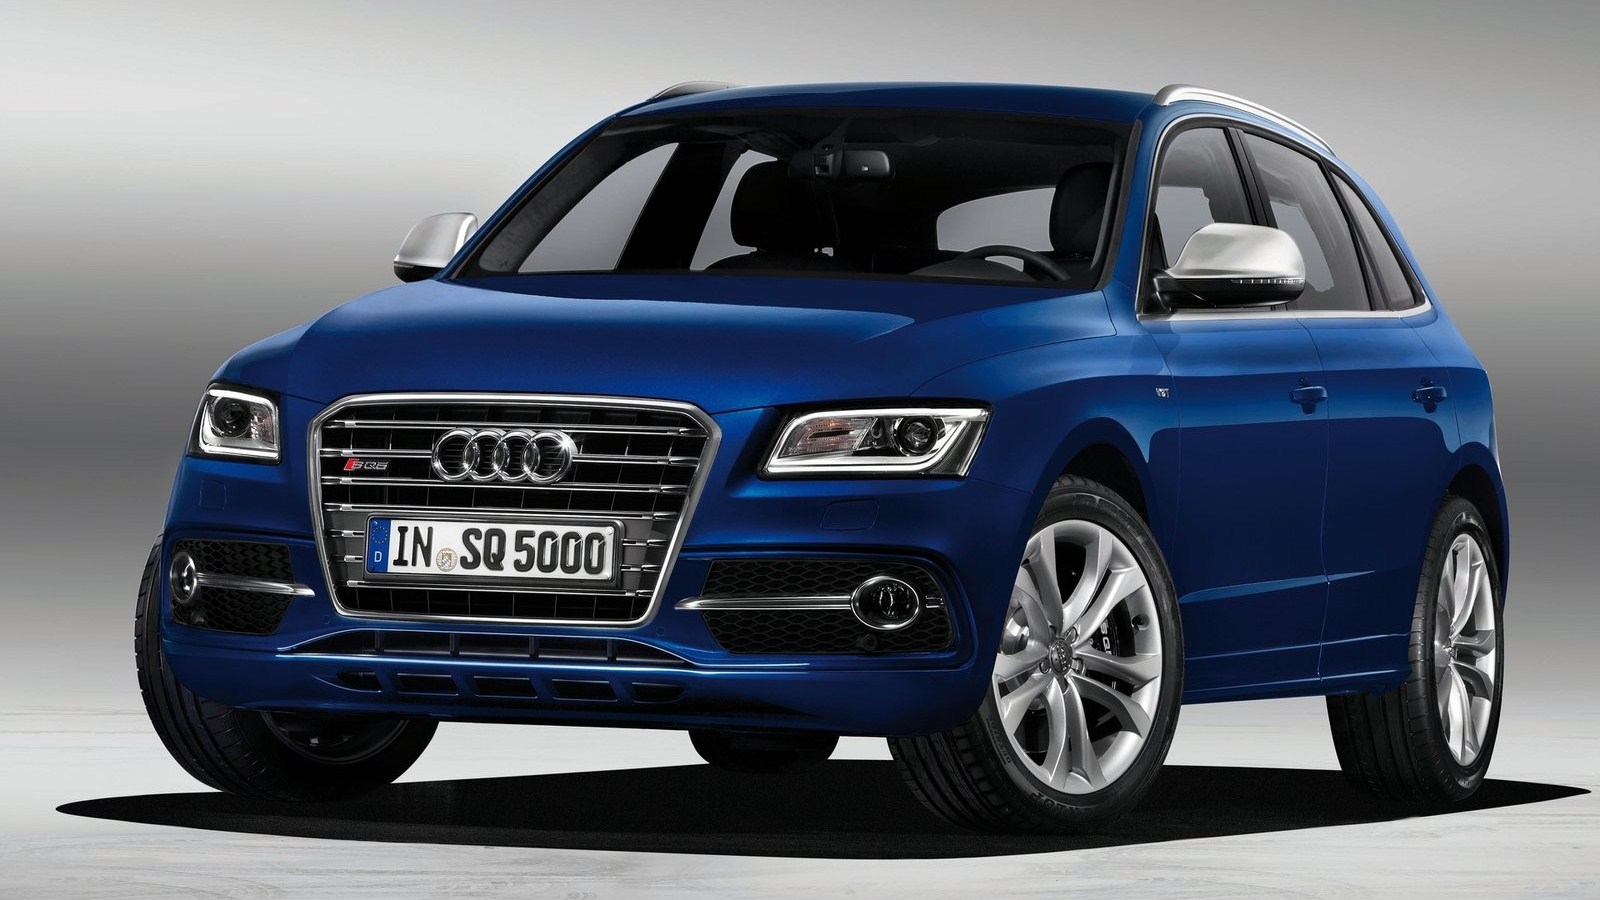 2014 audi sq5 front angle in the exterior audi has